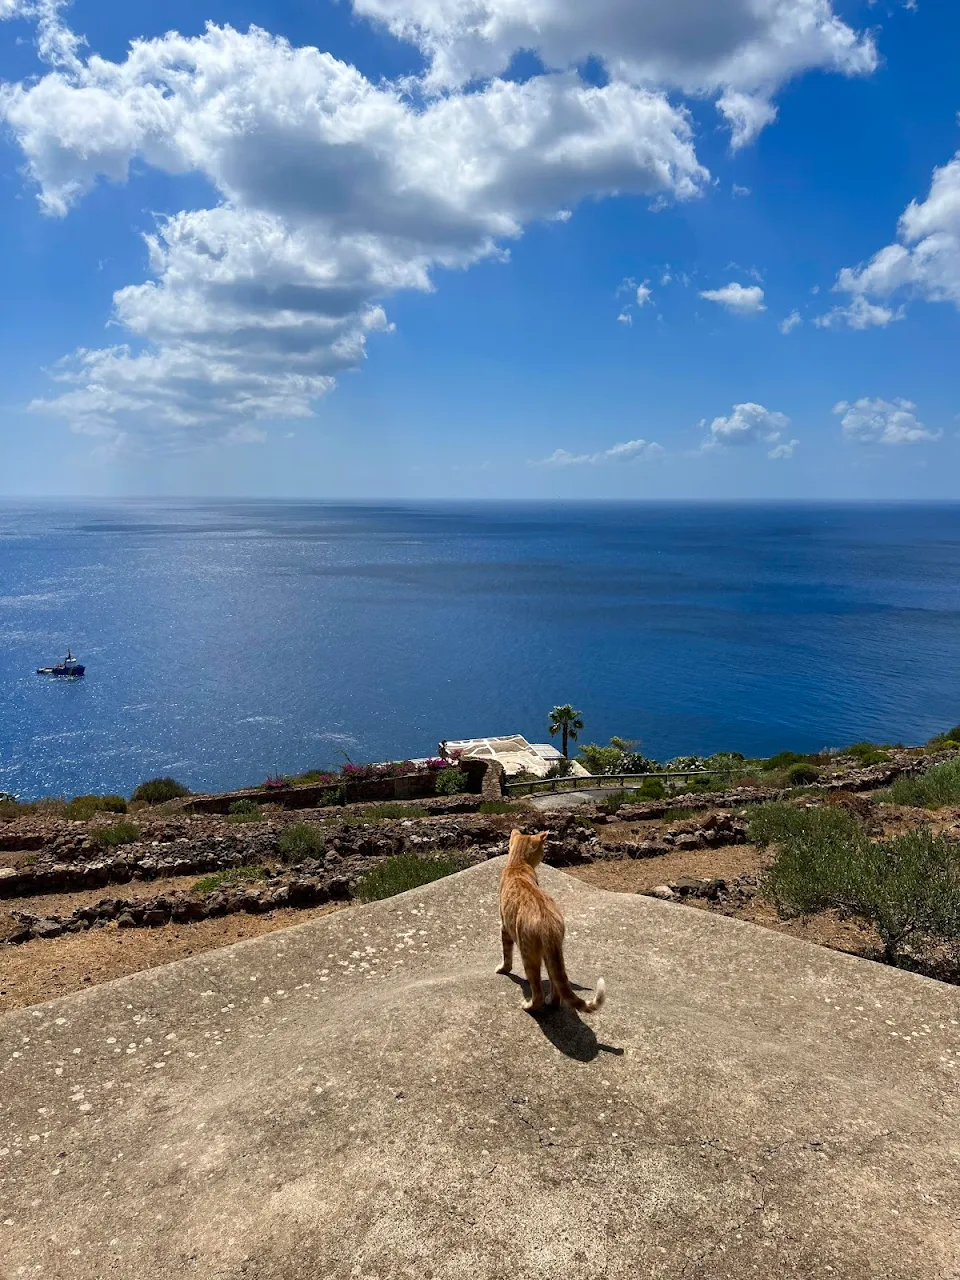 This kitten just welcomed me in Pantelleria, one of the most wildly beautiful Italian islands.